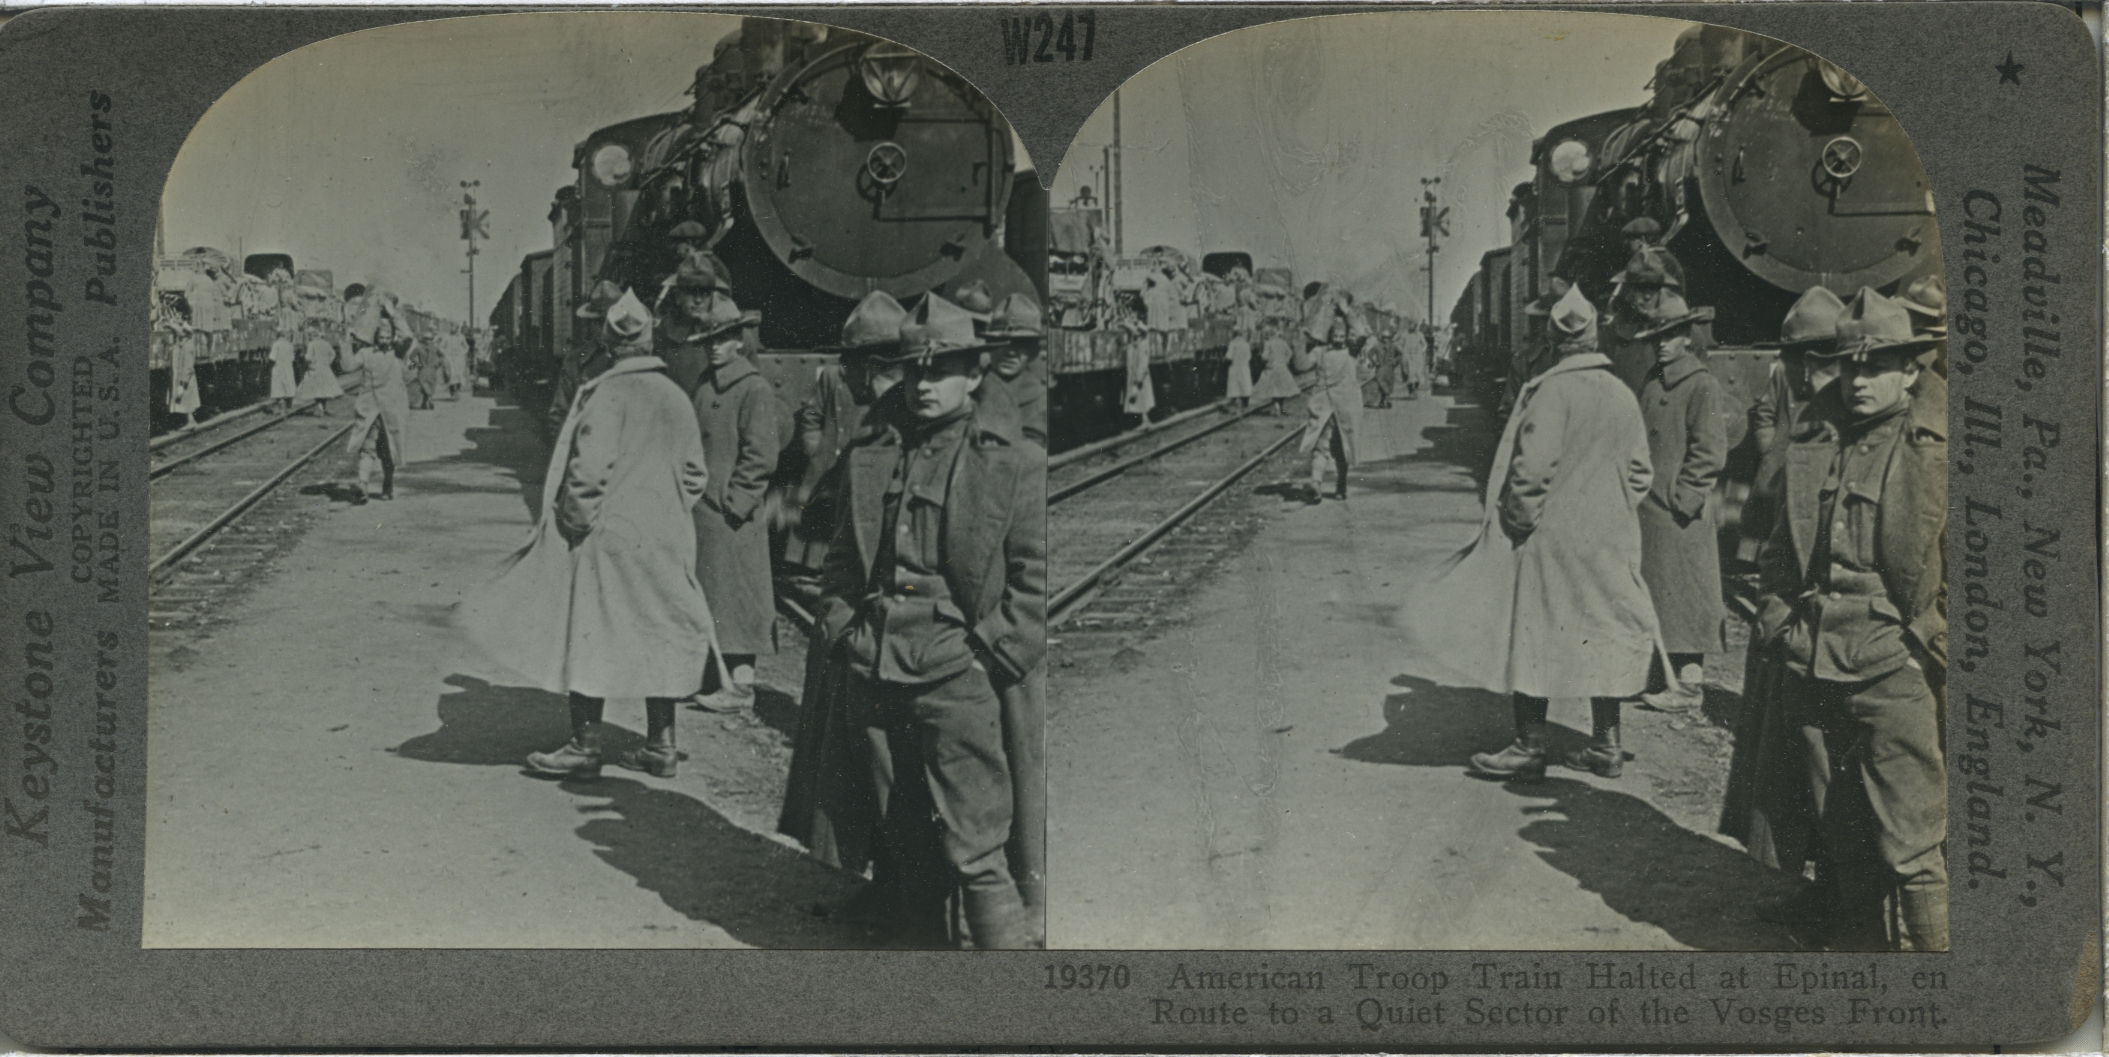 American Troop Train Halted at Epinal, en Route to a Quiet Sector of the Vosges Front